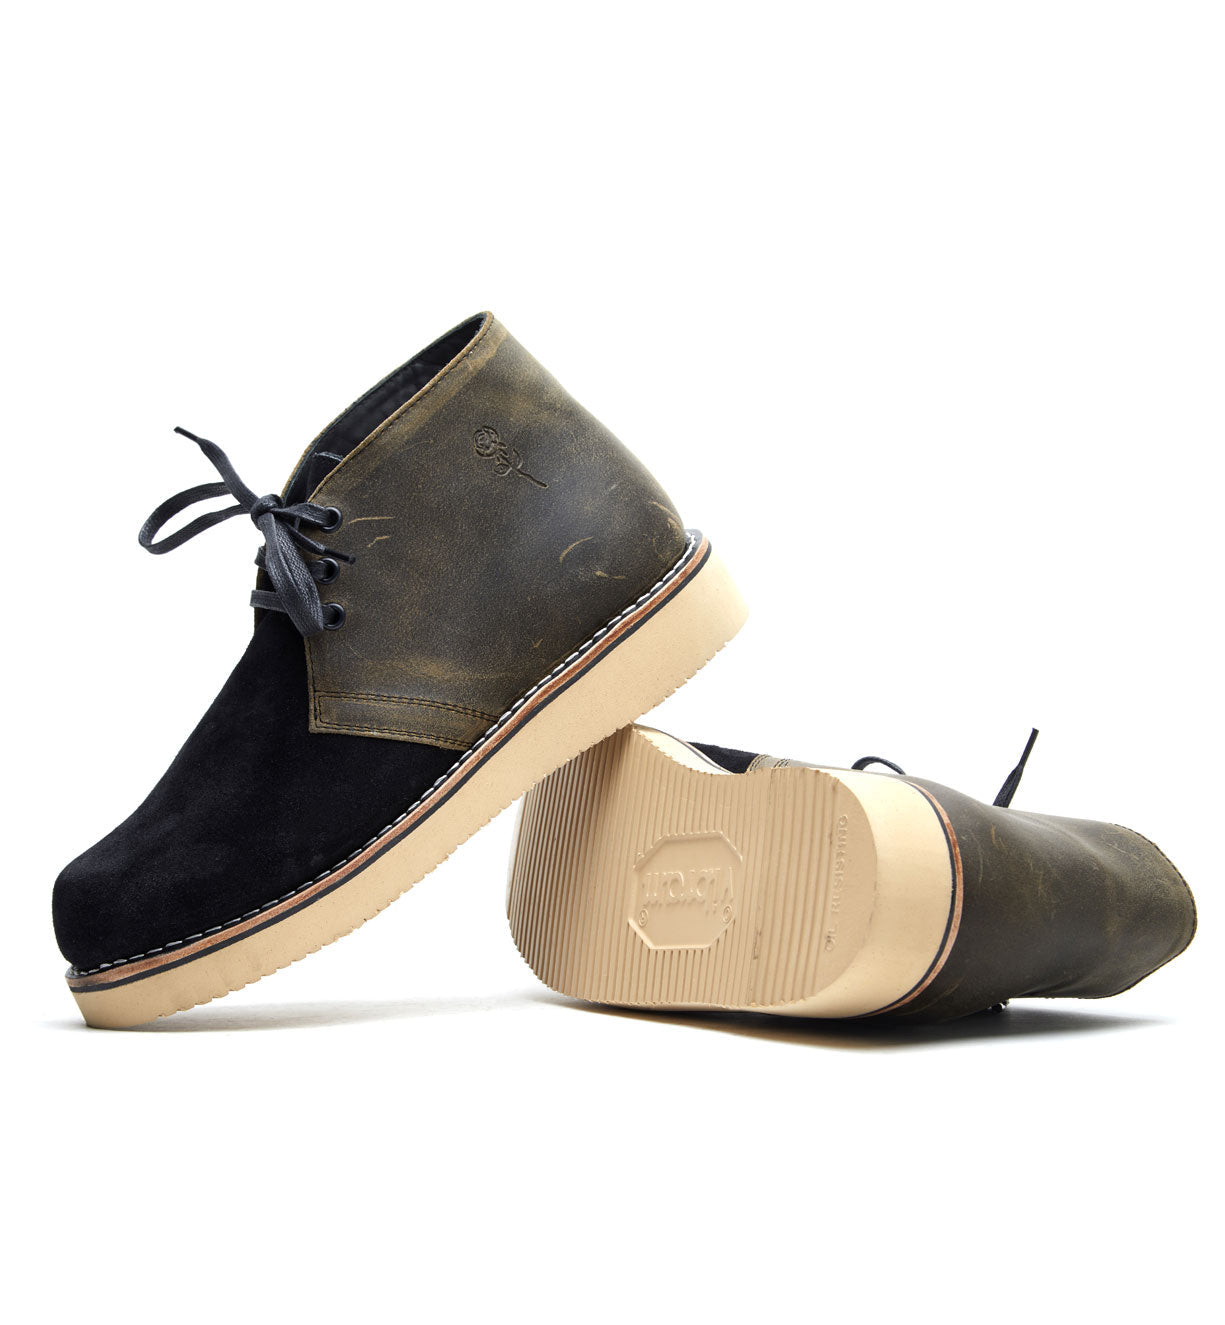 A pair of Union Boots with tan soles from the Santa Rosa Brand collection.